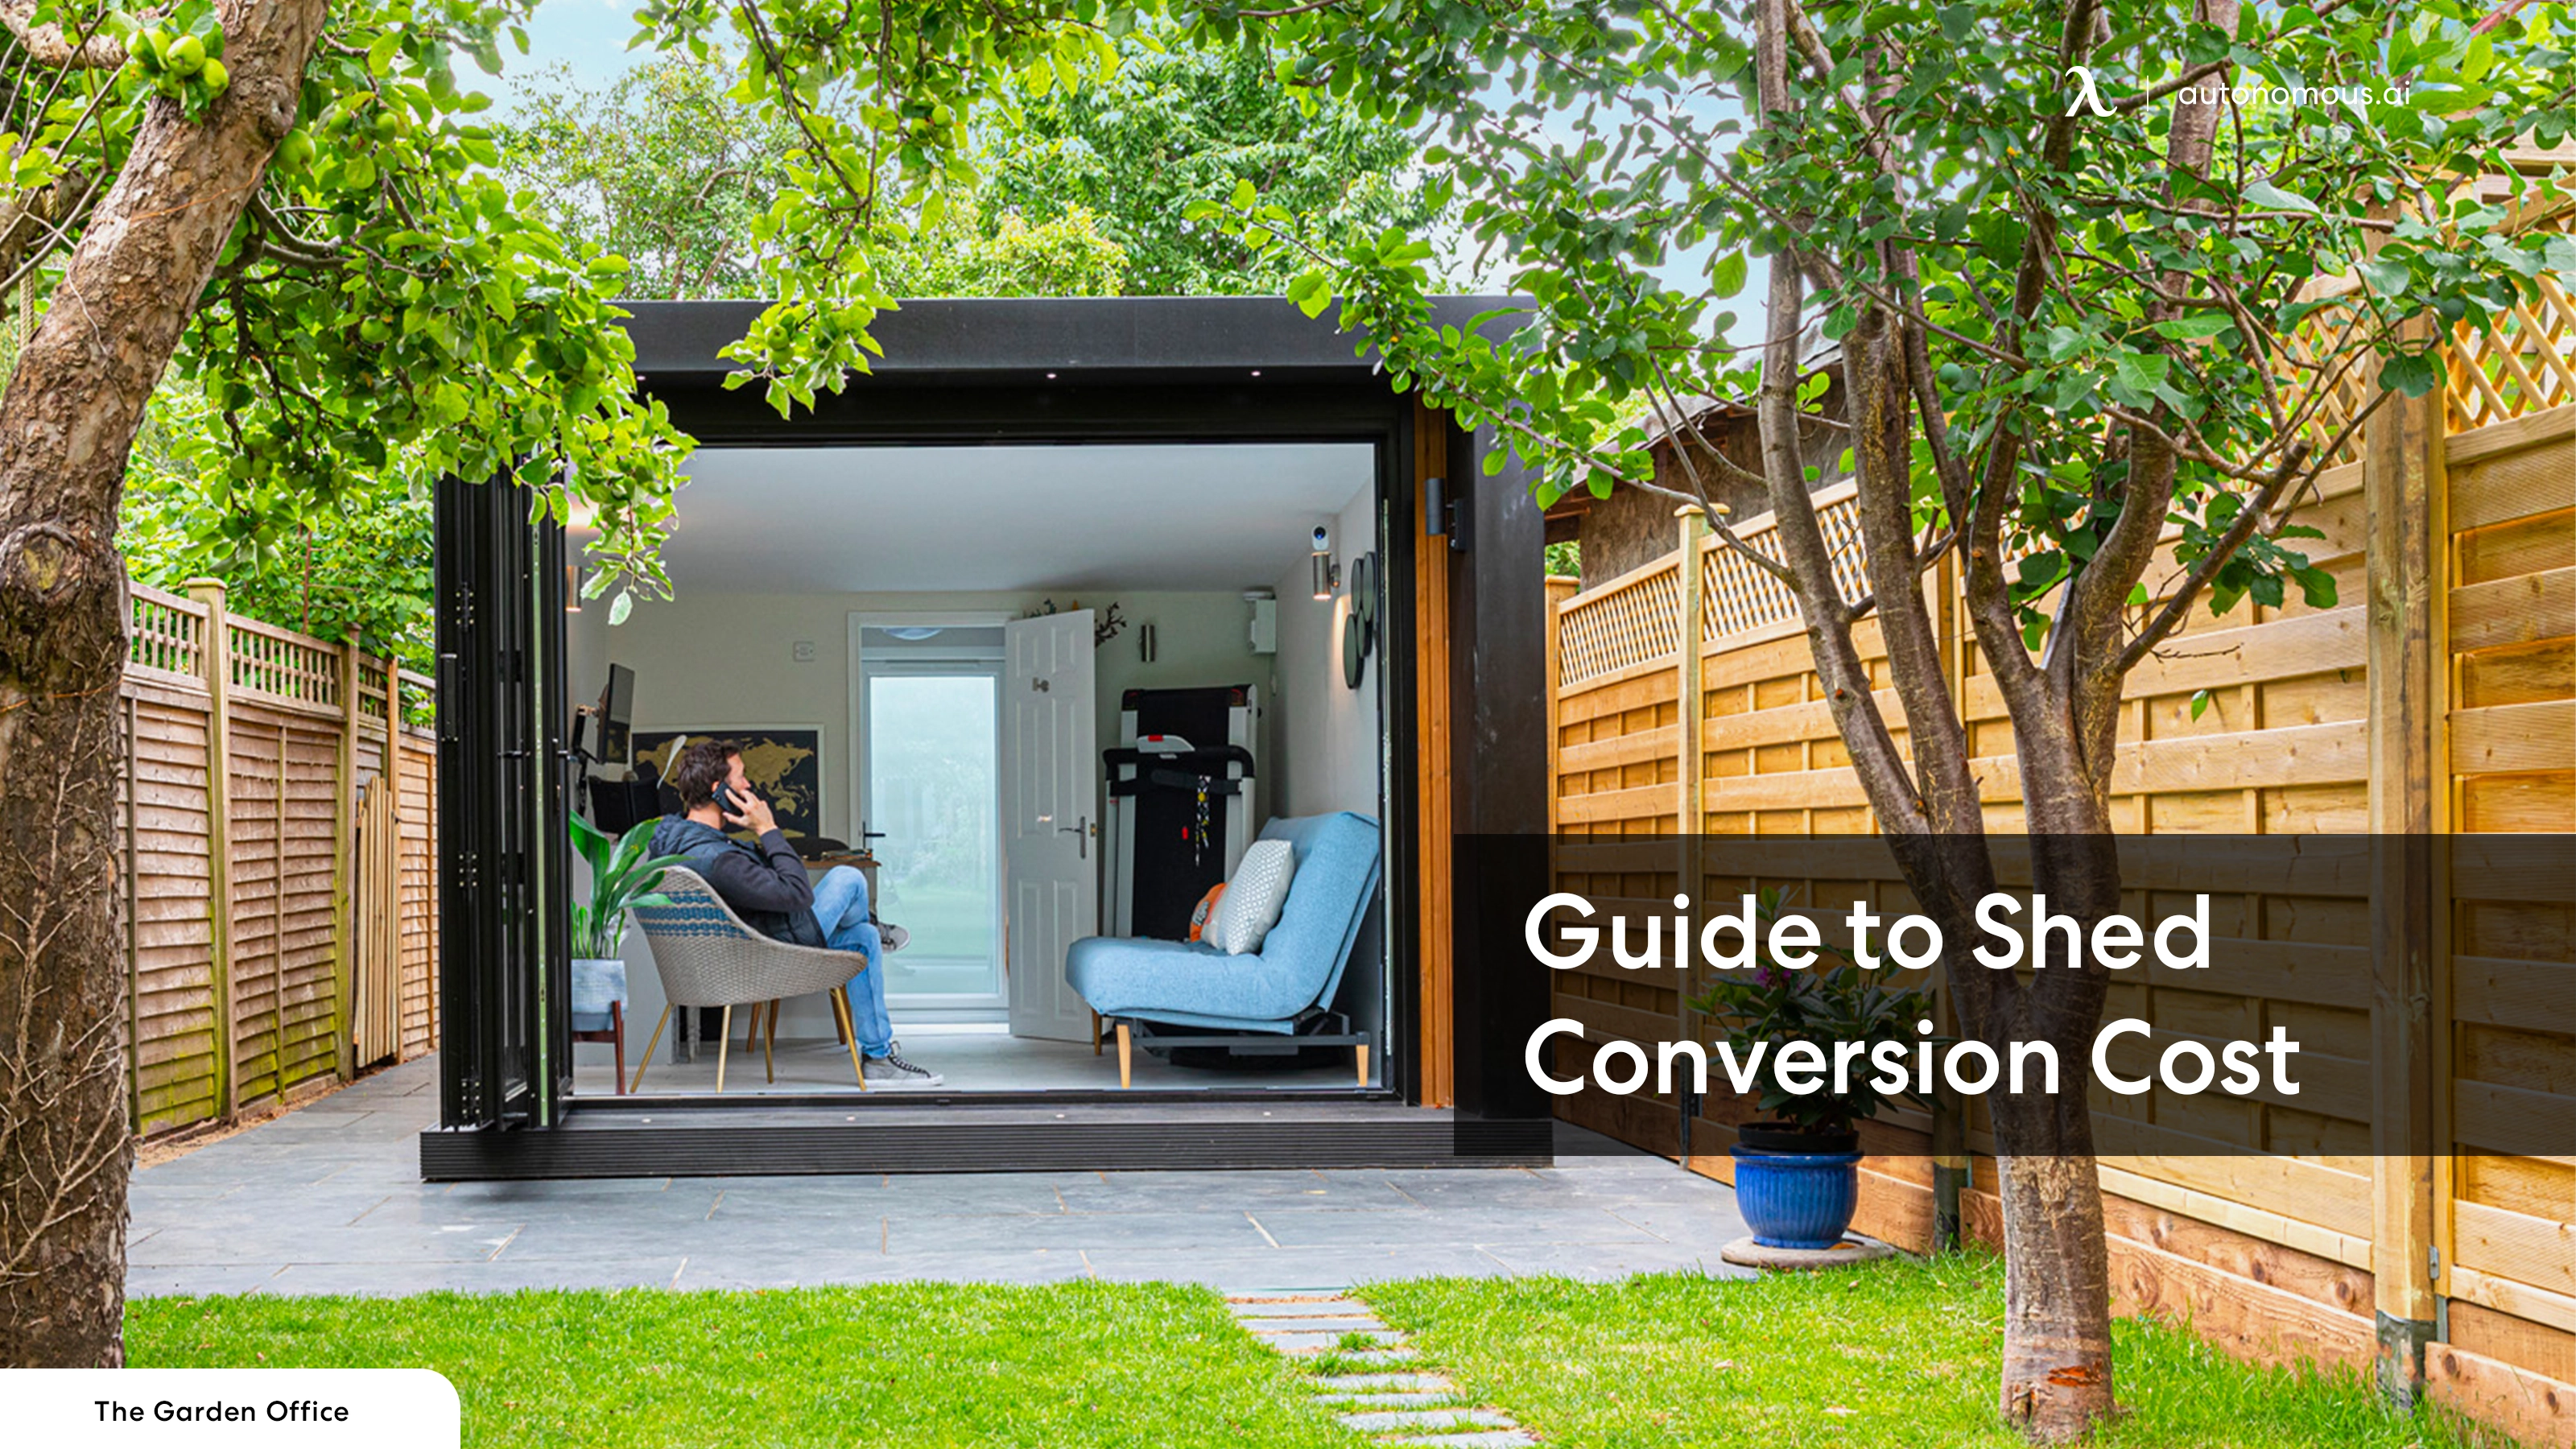 How Much Do You Have to Pay for Shed Conversions? – Complete Guide